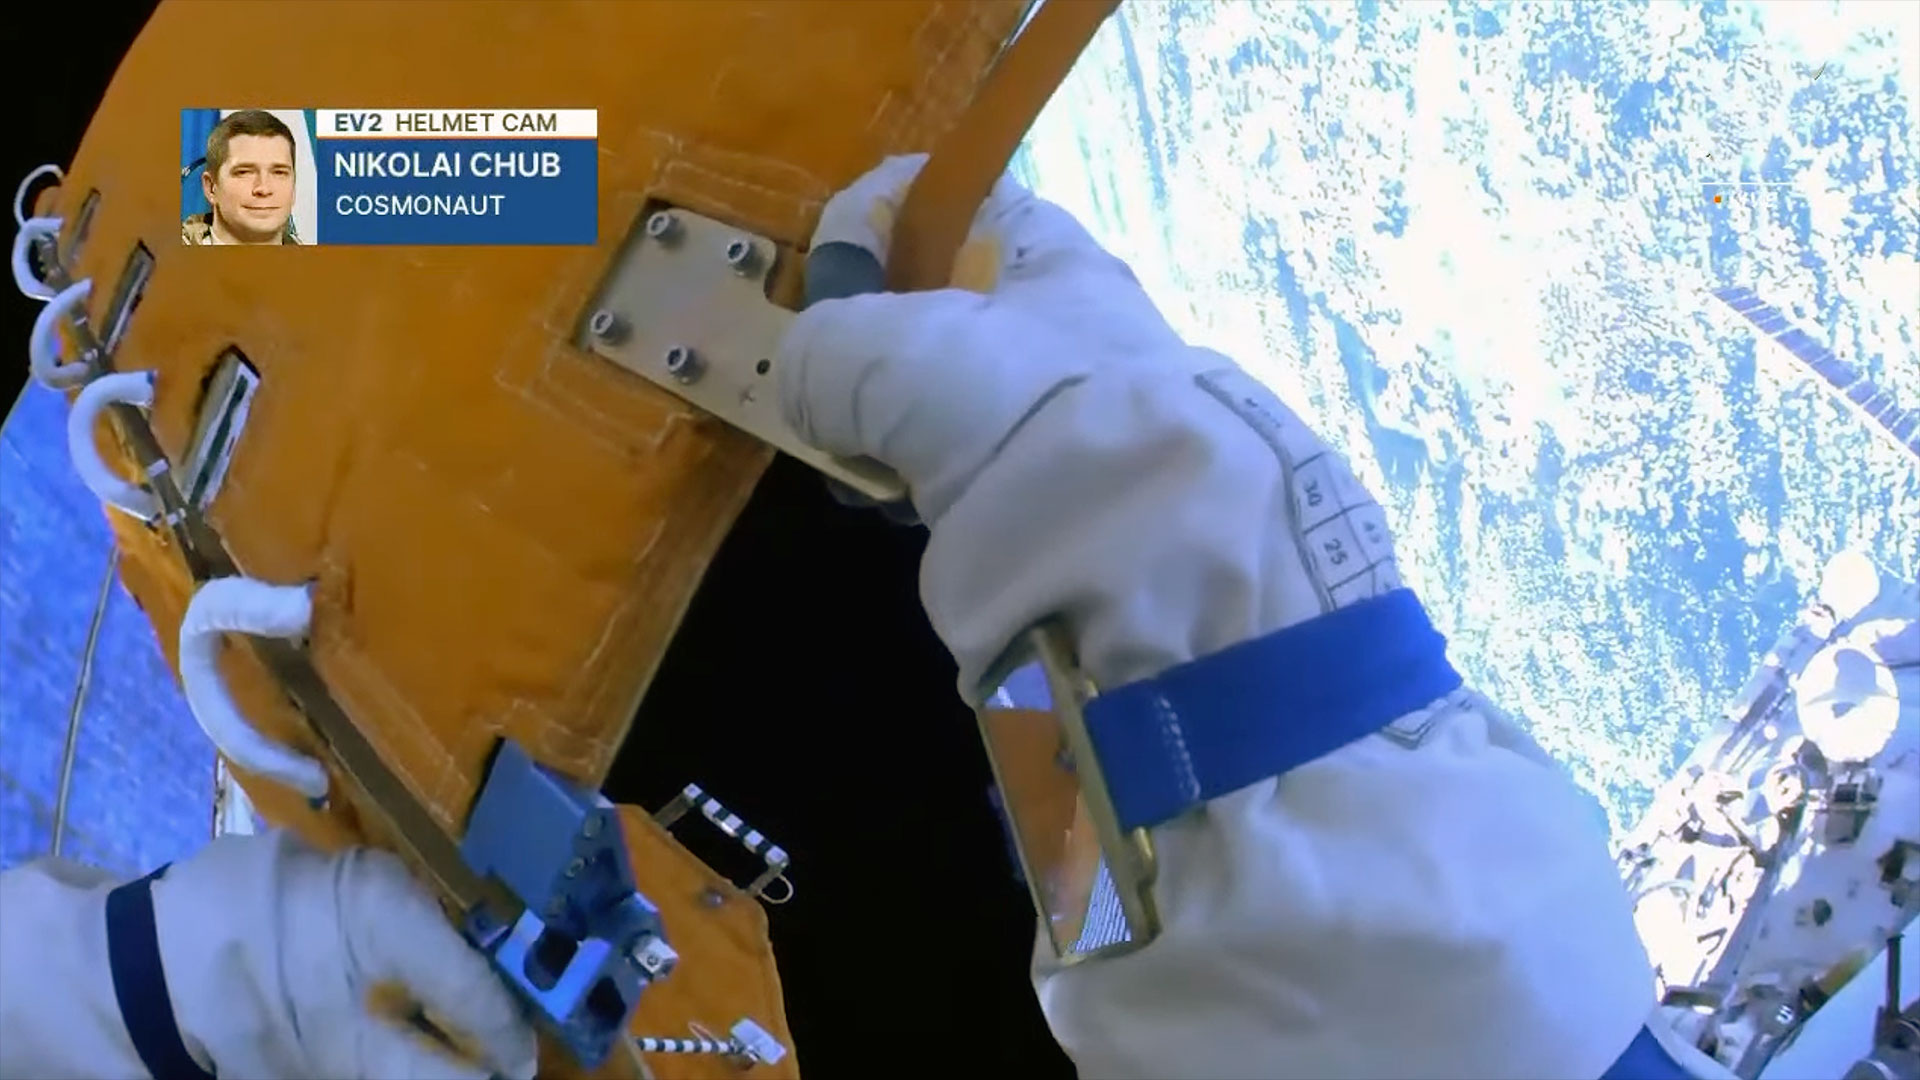 closeup of a cosmonaut's white glove holding an orange object during a spacewalk